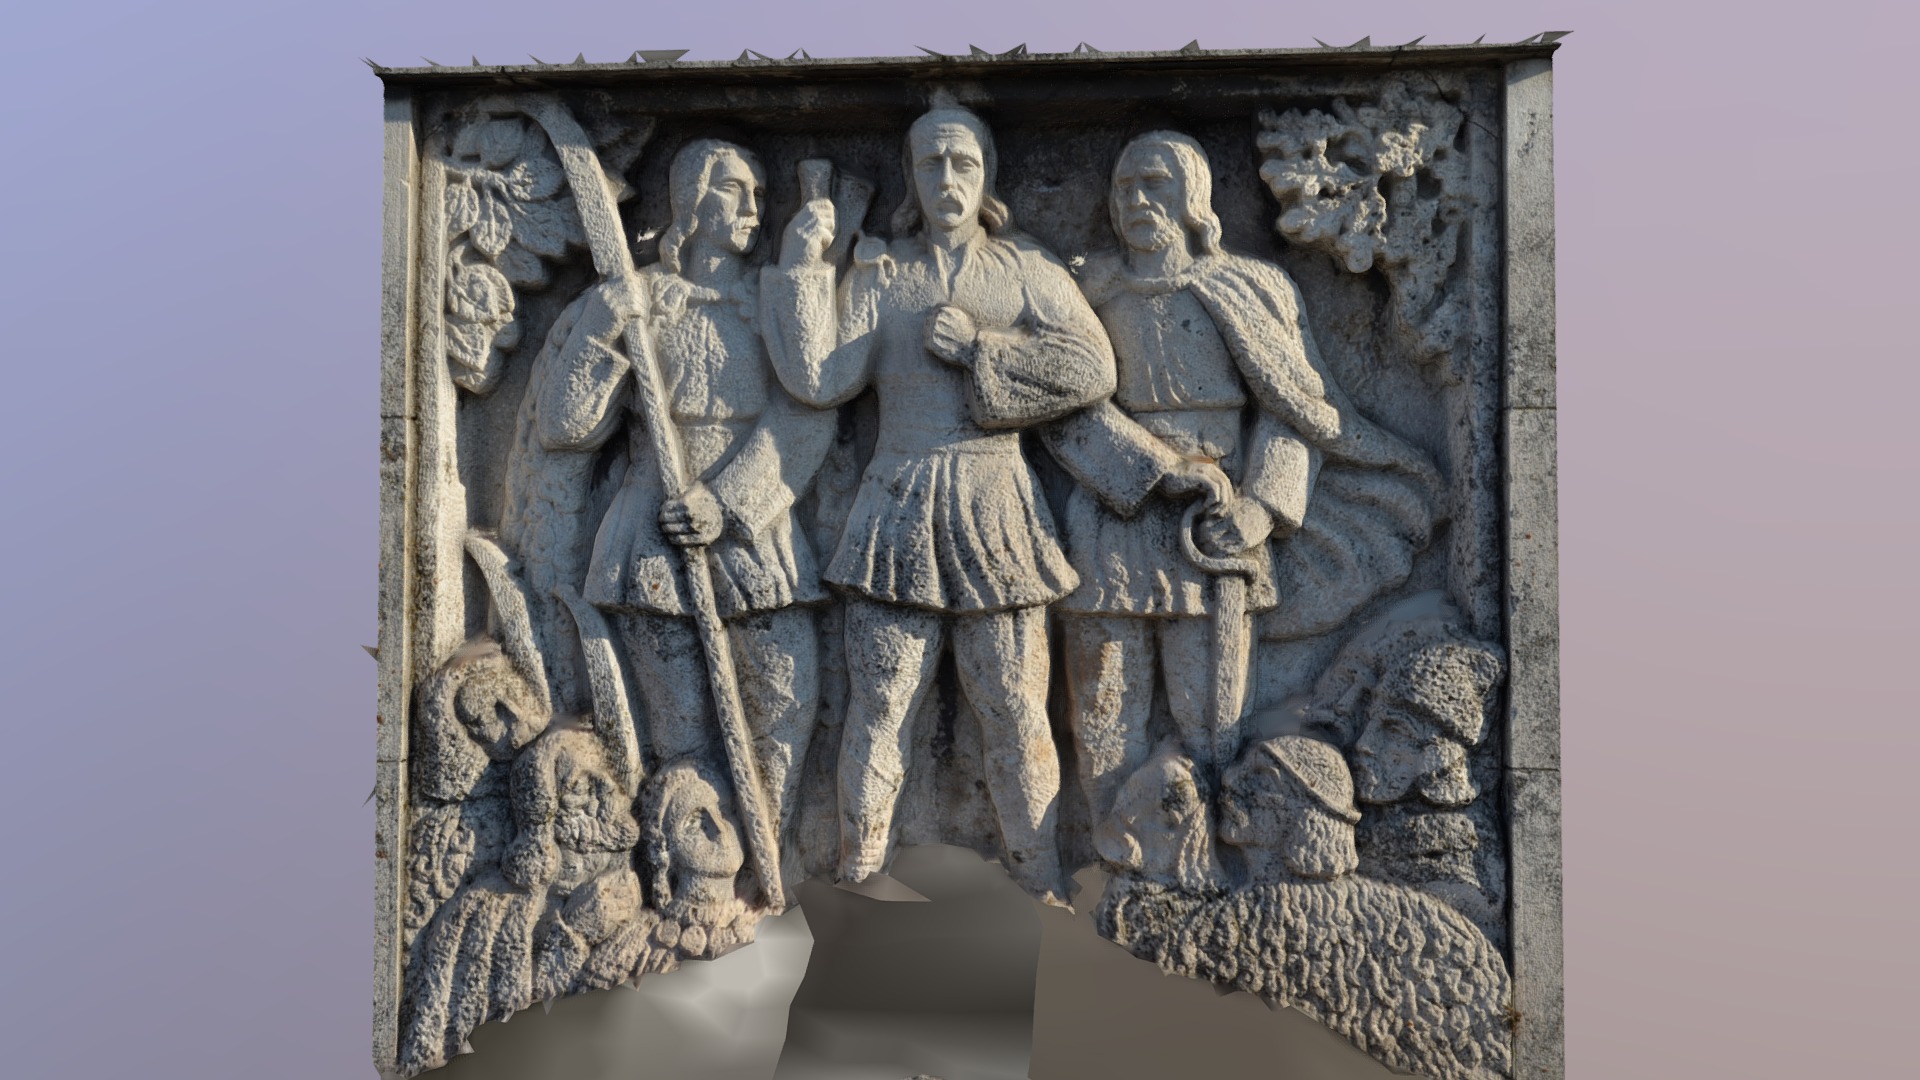 3D model Horia, Closca si Crisan 1784 - This is a 3D model of the Horia, Closca si Crisan 1784. The 3D model is about a stone sculpture of a group of people.